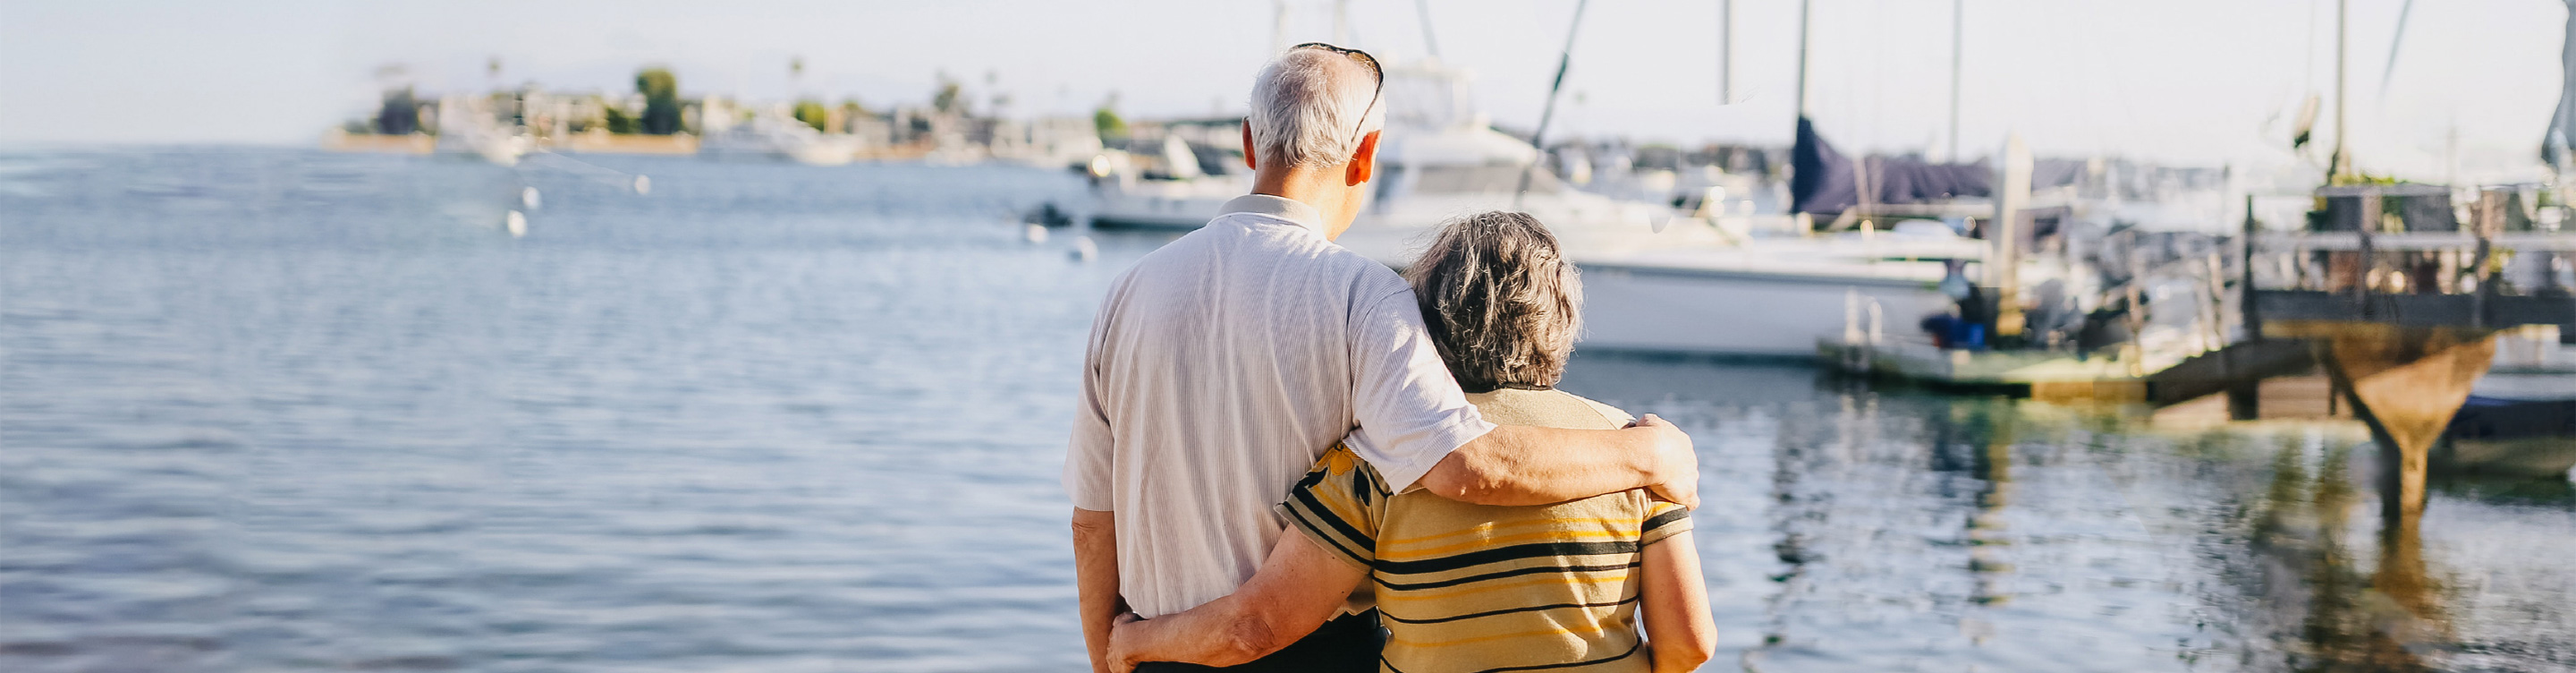 Elderly man and woman with their arms around each other, looking out onto a marina. 